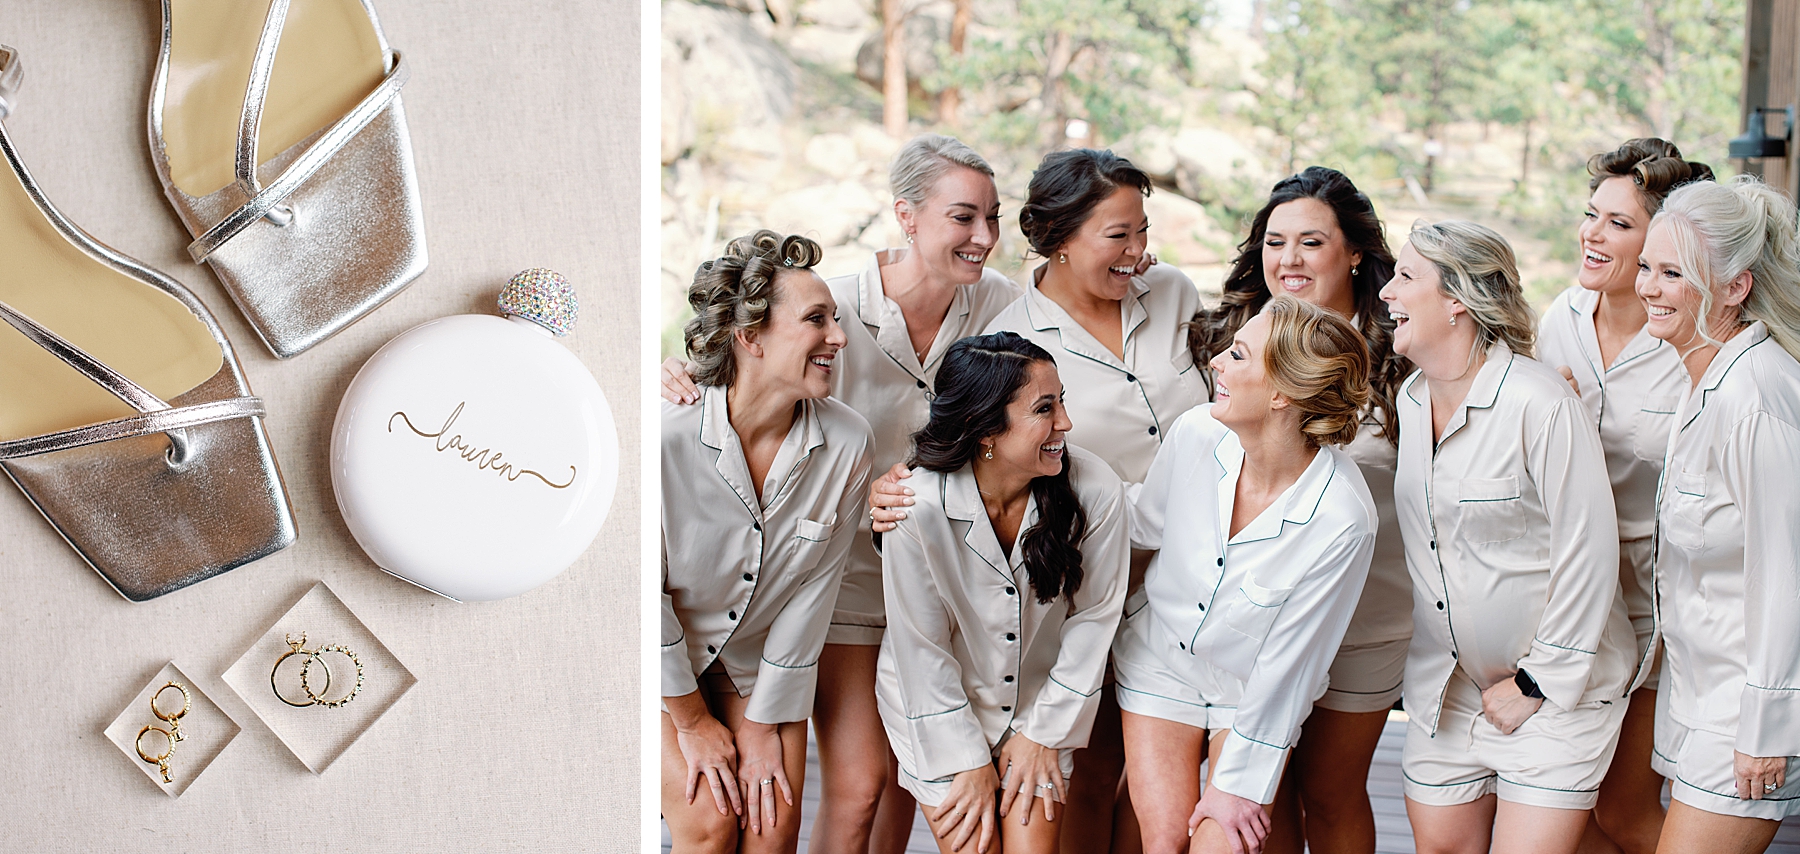 Bridal details and getting ready at The Boulders at Black Canyon Inn